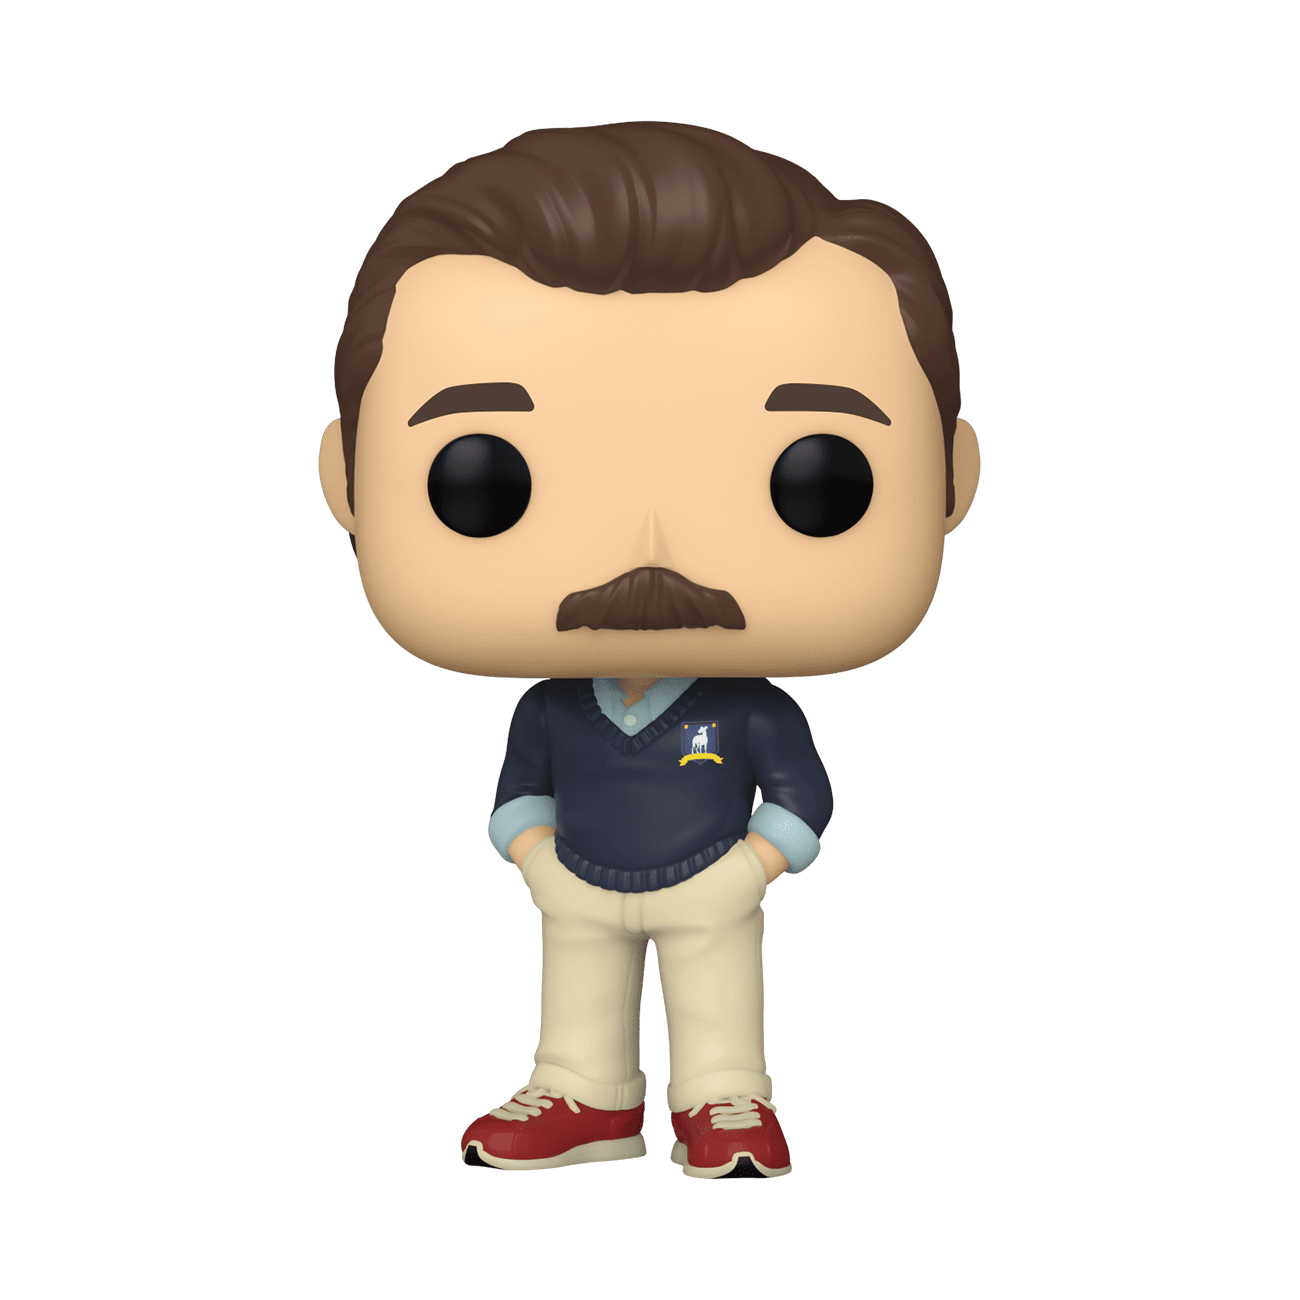 Buy Pop! Ted Lasso at Funko.